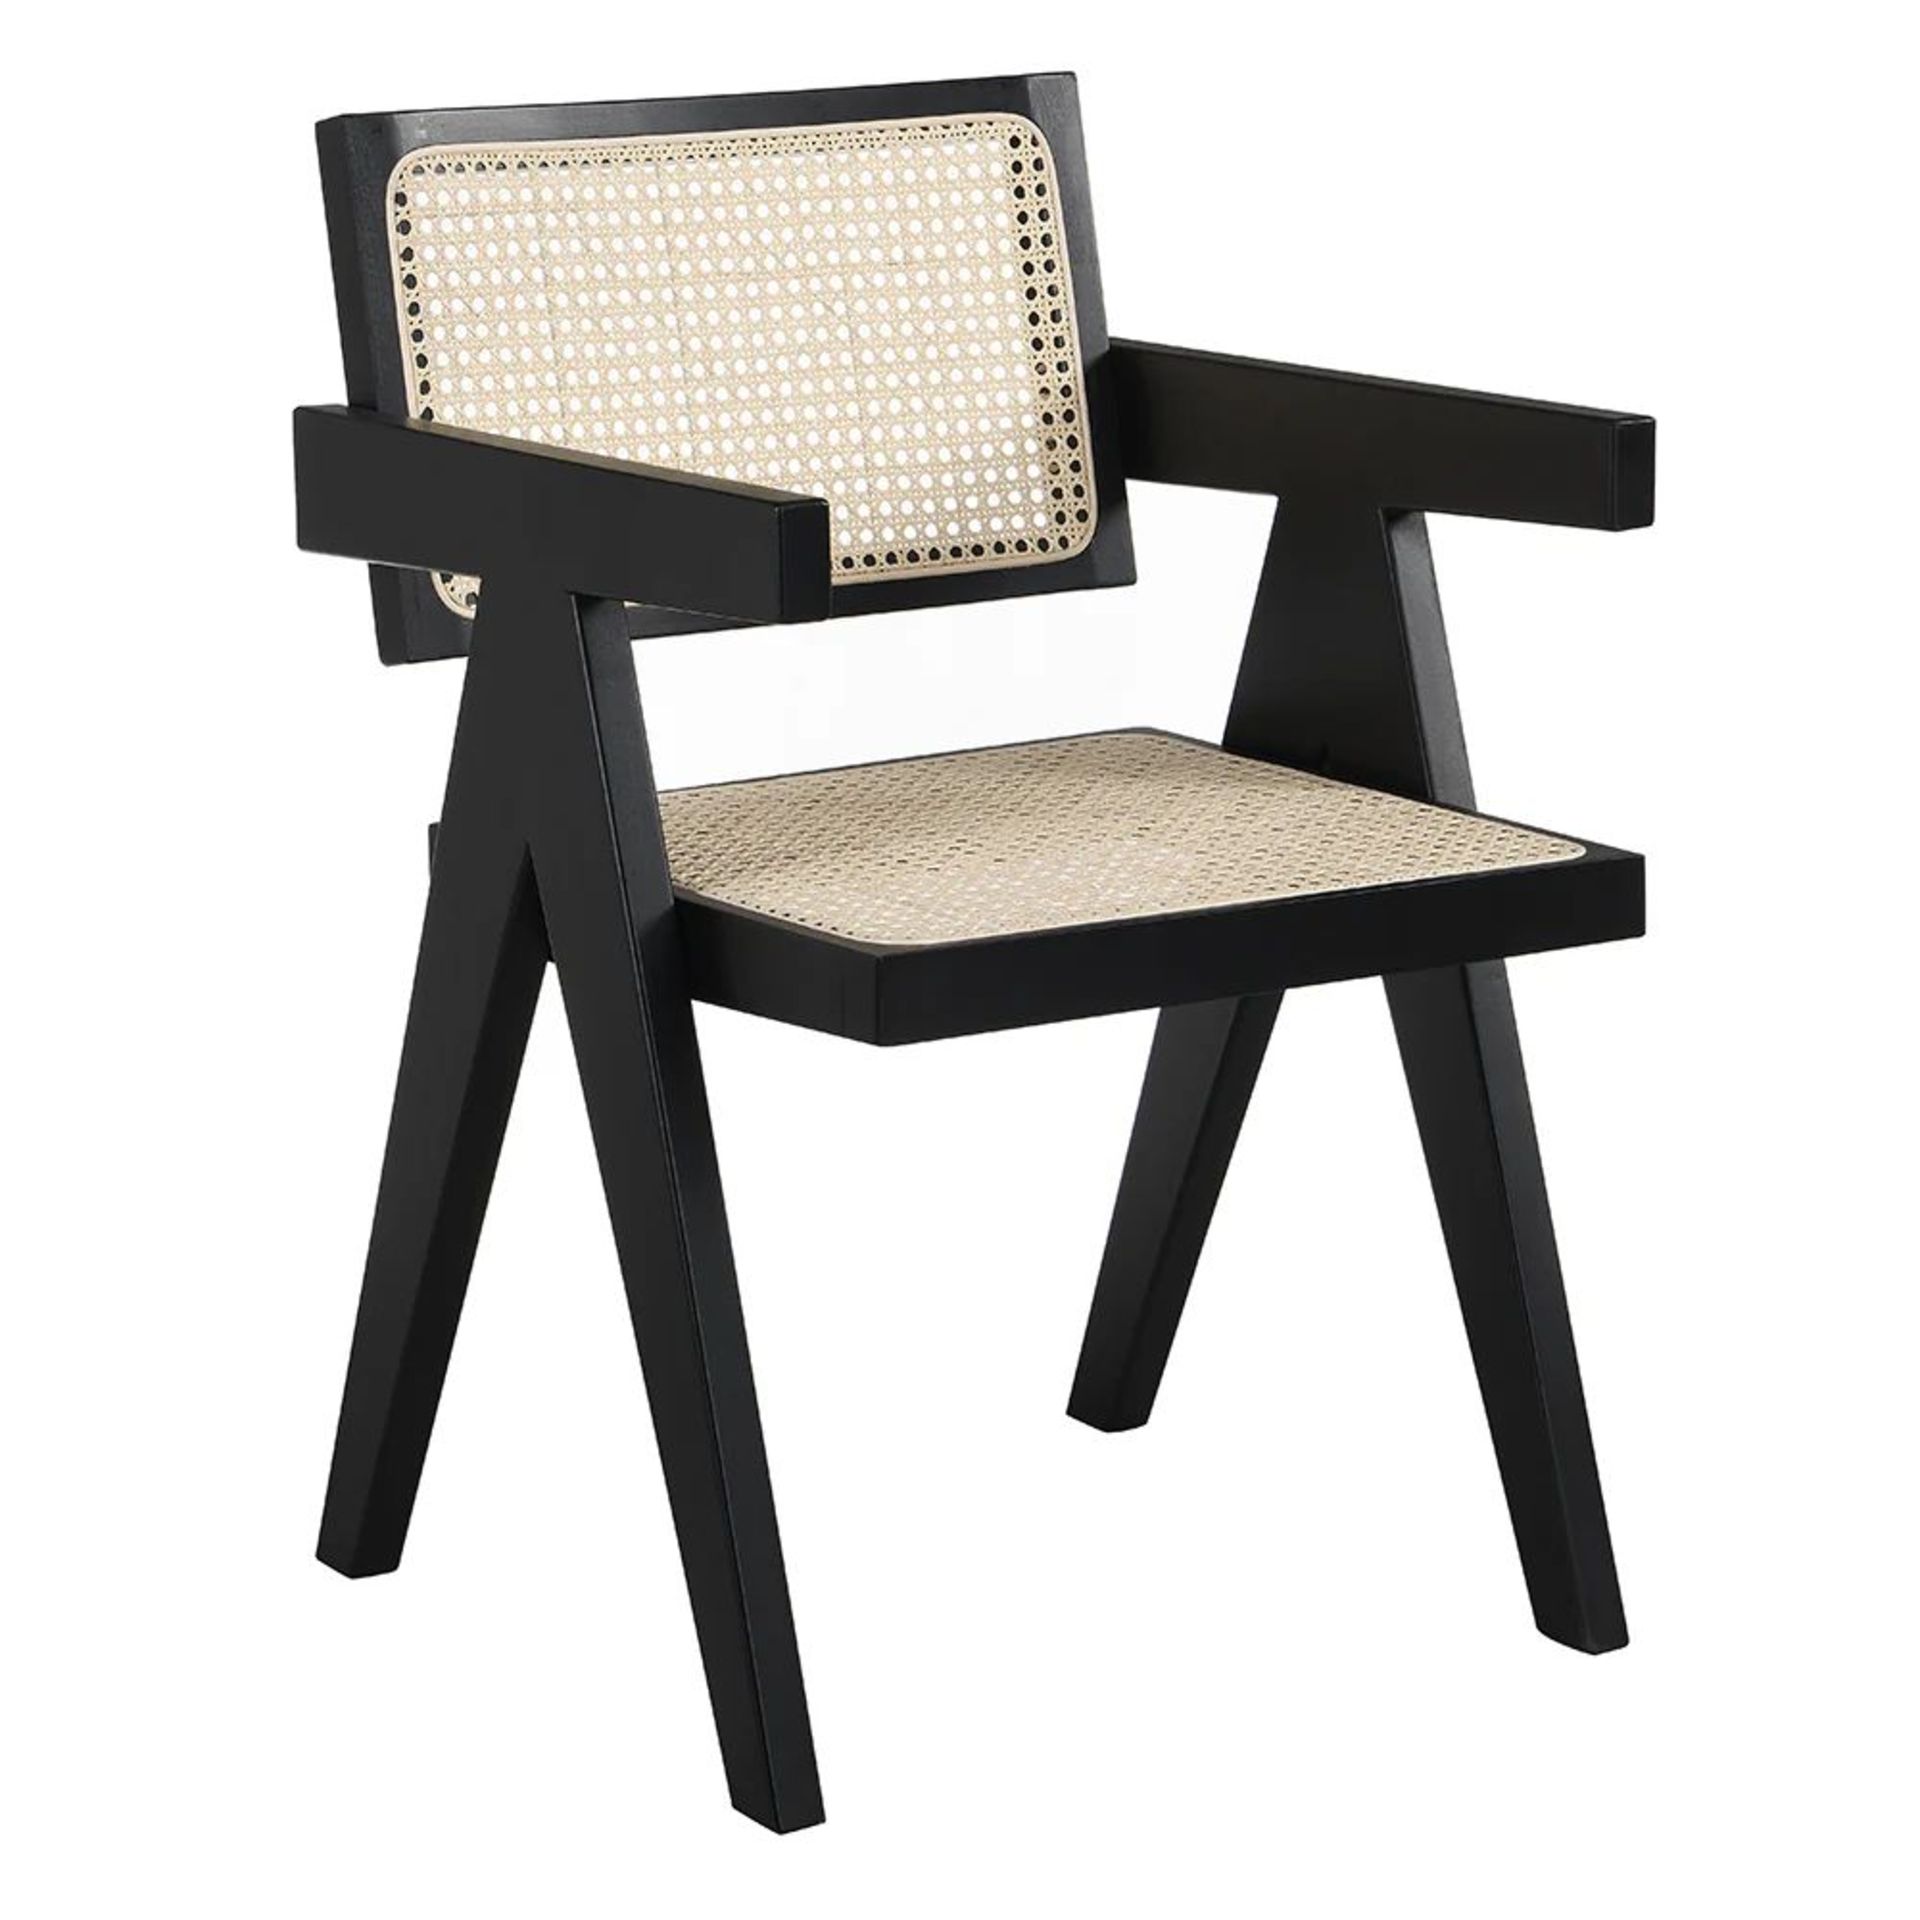 Jeanne Black Colour Cane Rattan Solid Beech Wood Dining Chair. - R19.2. RRP £219.99. The cane rattan - Image 4 of 4